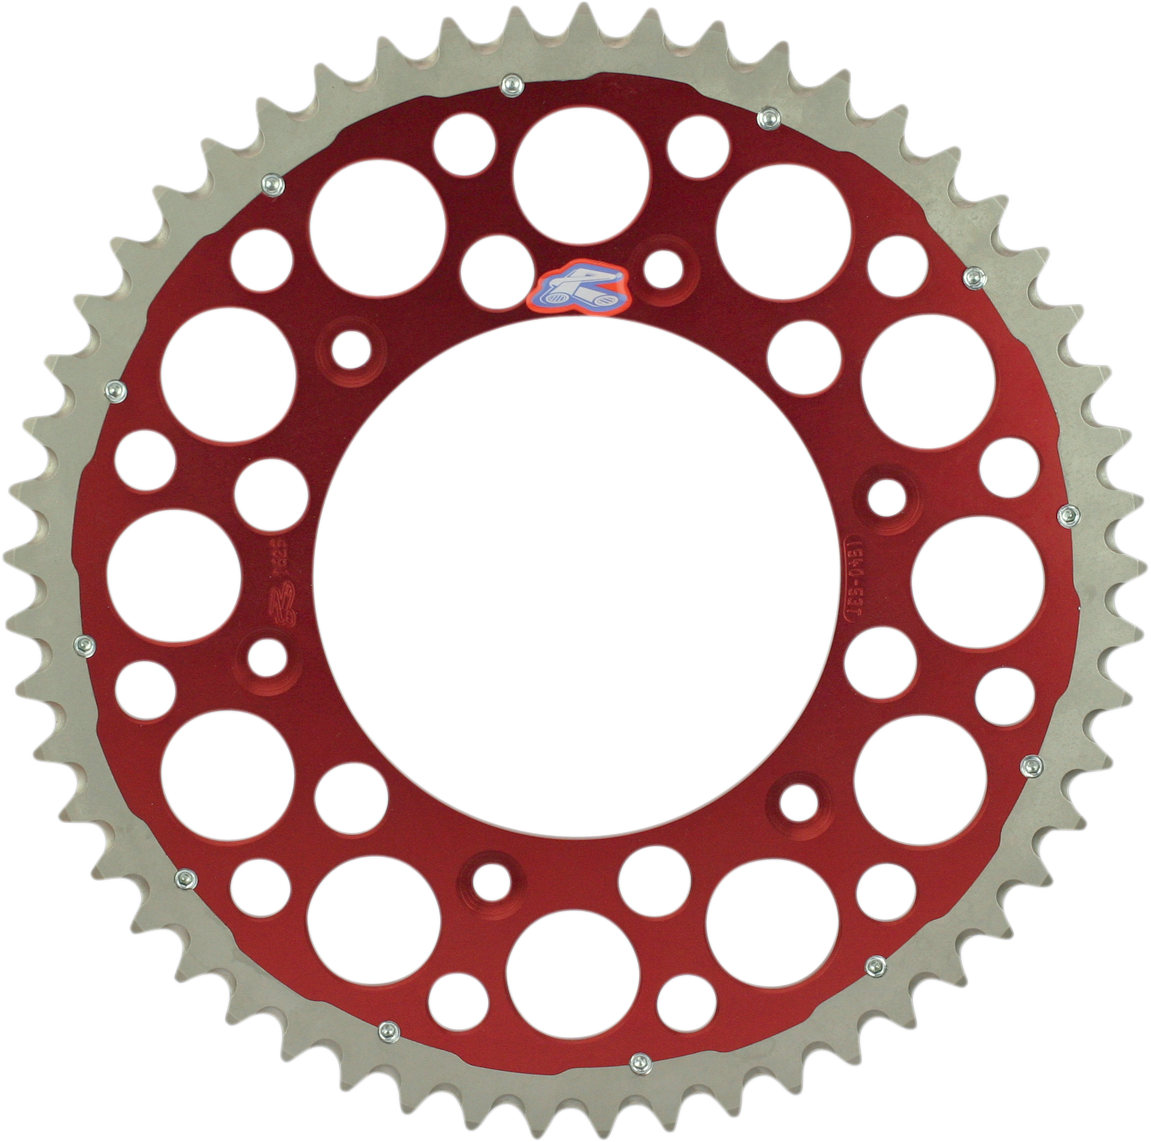 RENTHAL Twinring™ Rear Sprocket - 48 Tooth - Red 1540-520-48GPRD